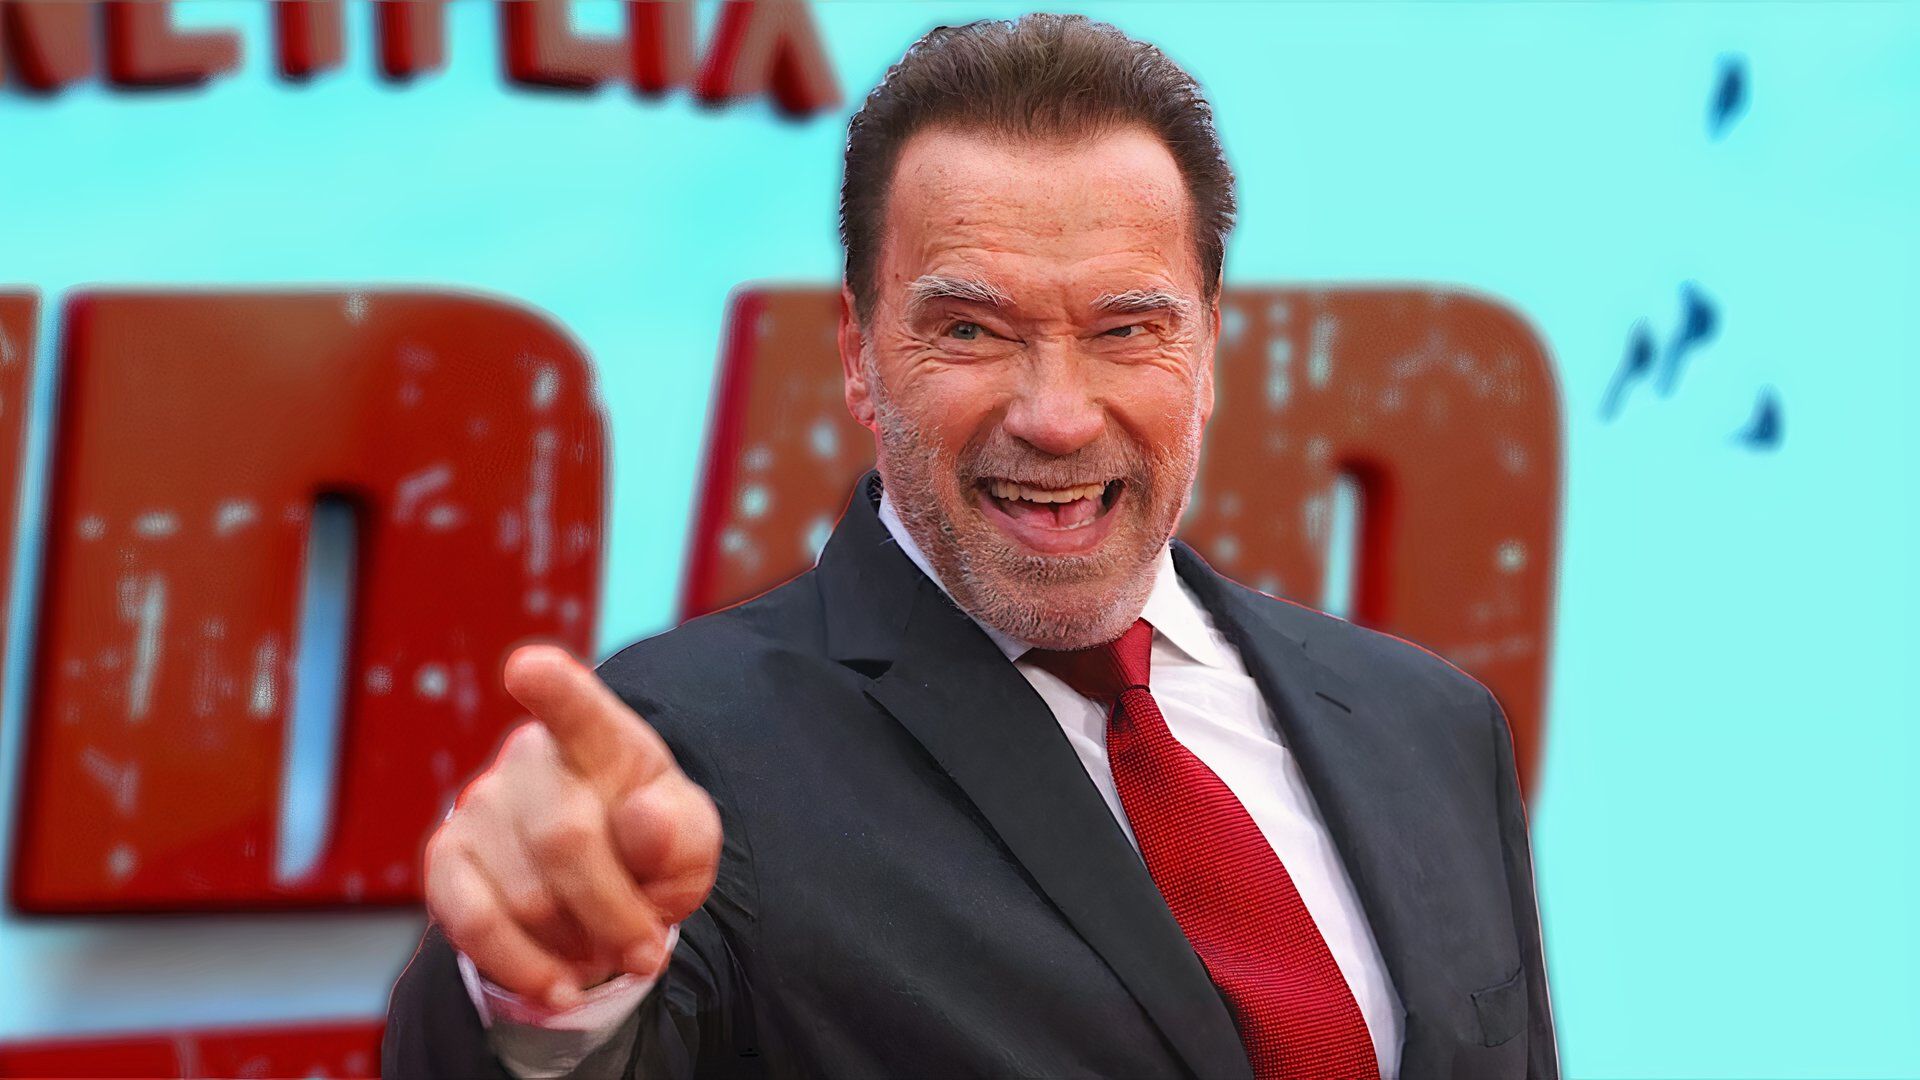 Arnold Schwarzenegger points his finger and laughs